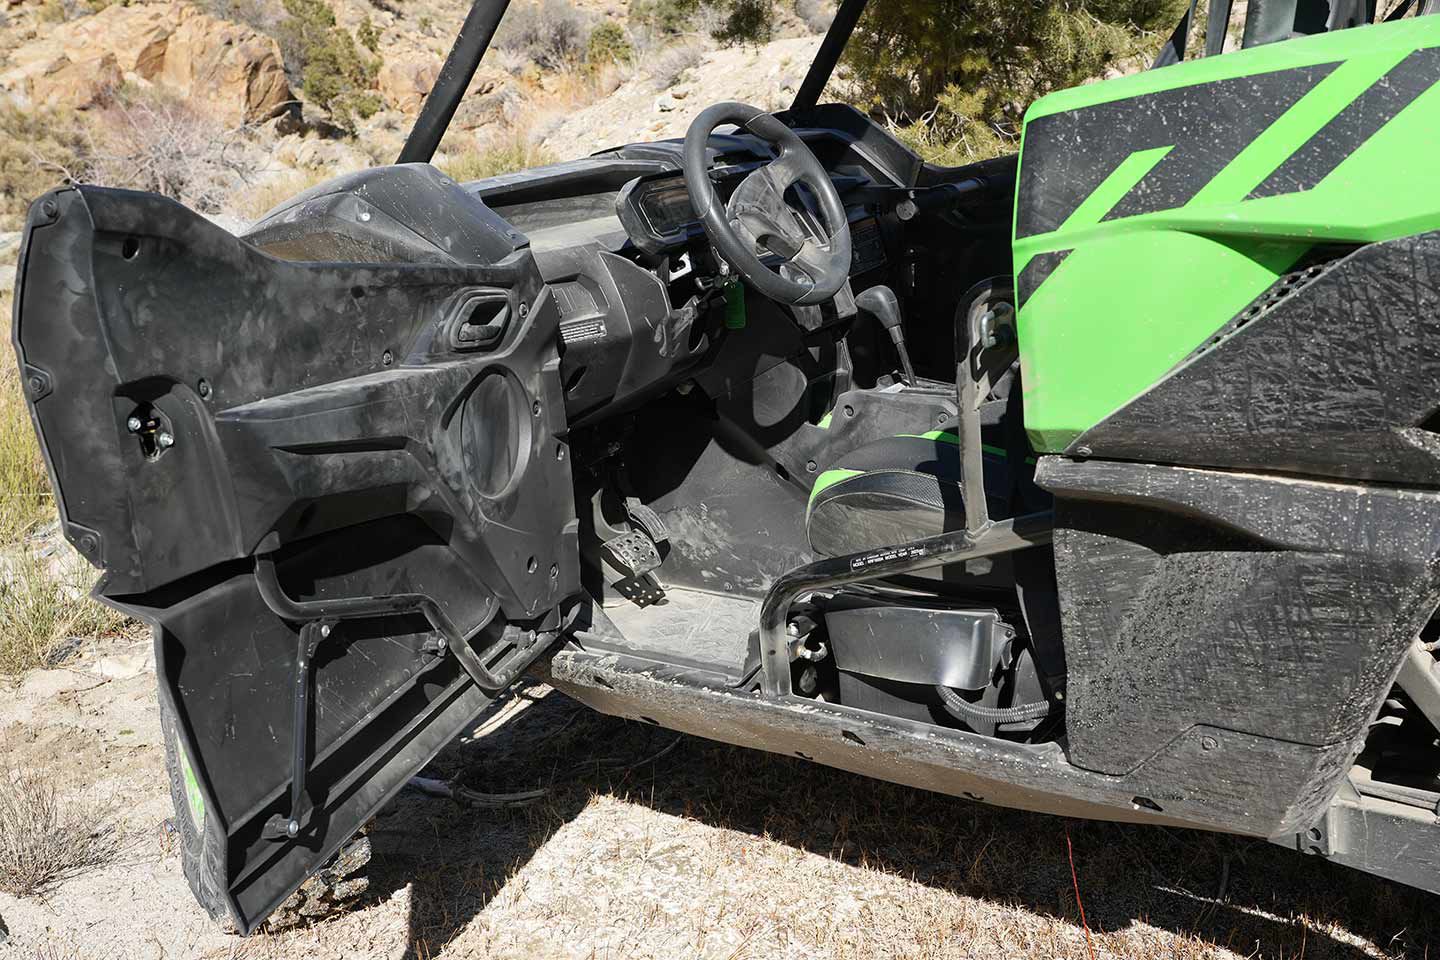 Tall doors with automotive-style latches help keep occupants safe. For ‘23, Kawasaki’s Teryx features improved steering wheel material, an updated floorboard design to better evacuate debris and ride-by-wire throttle.